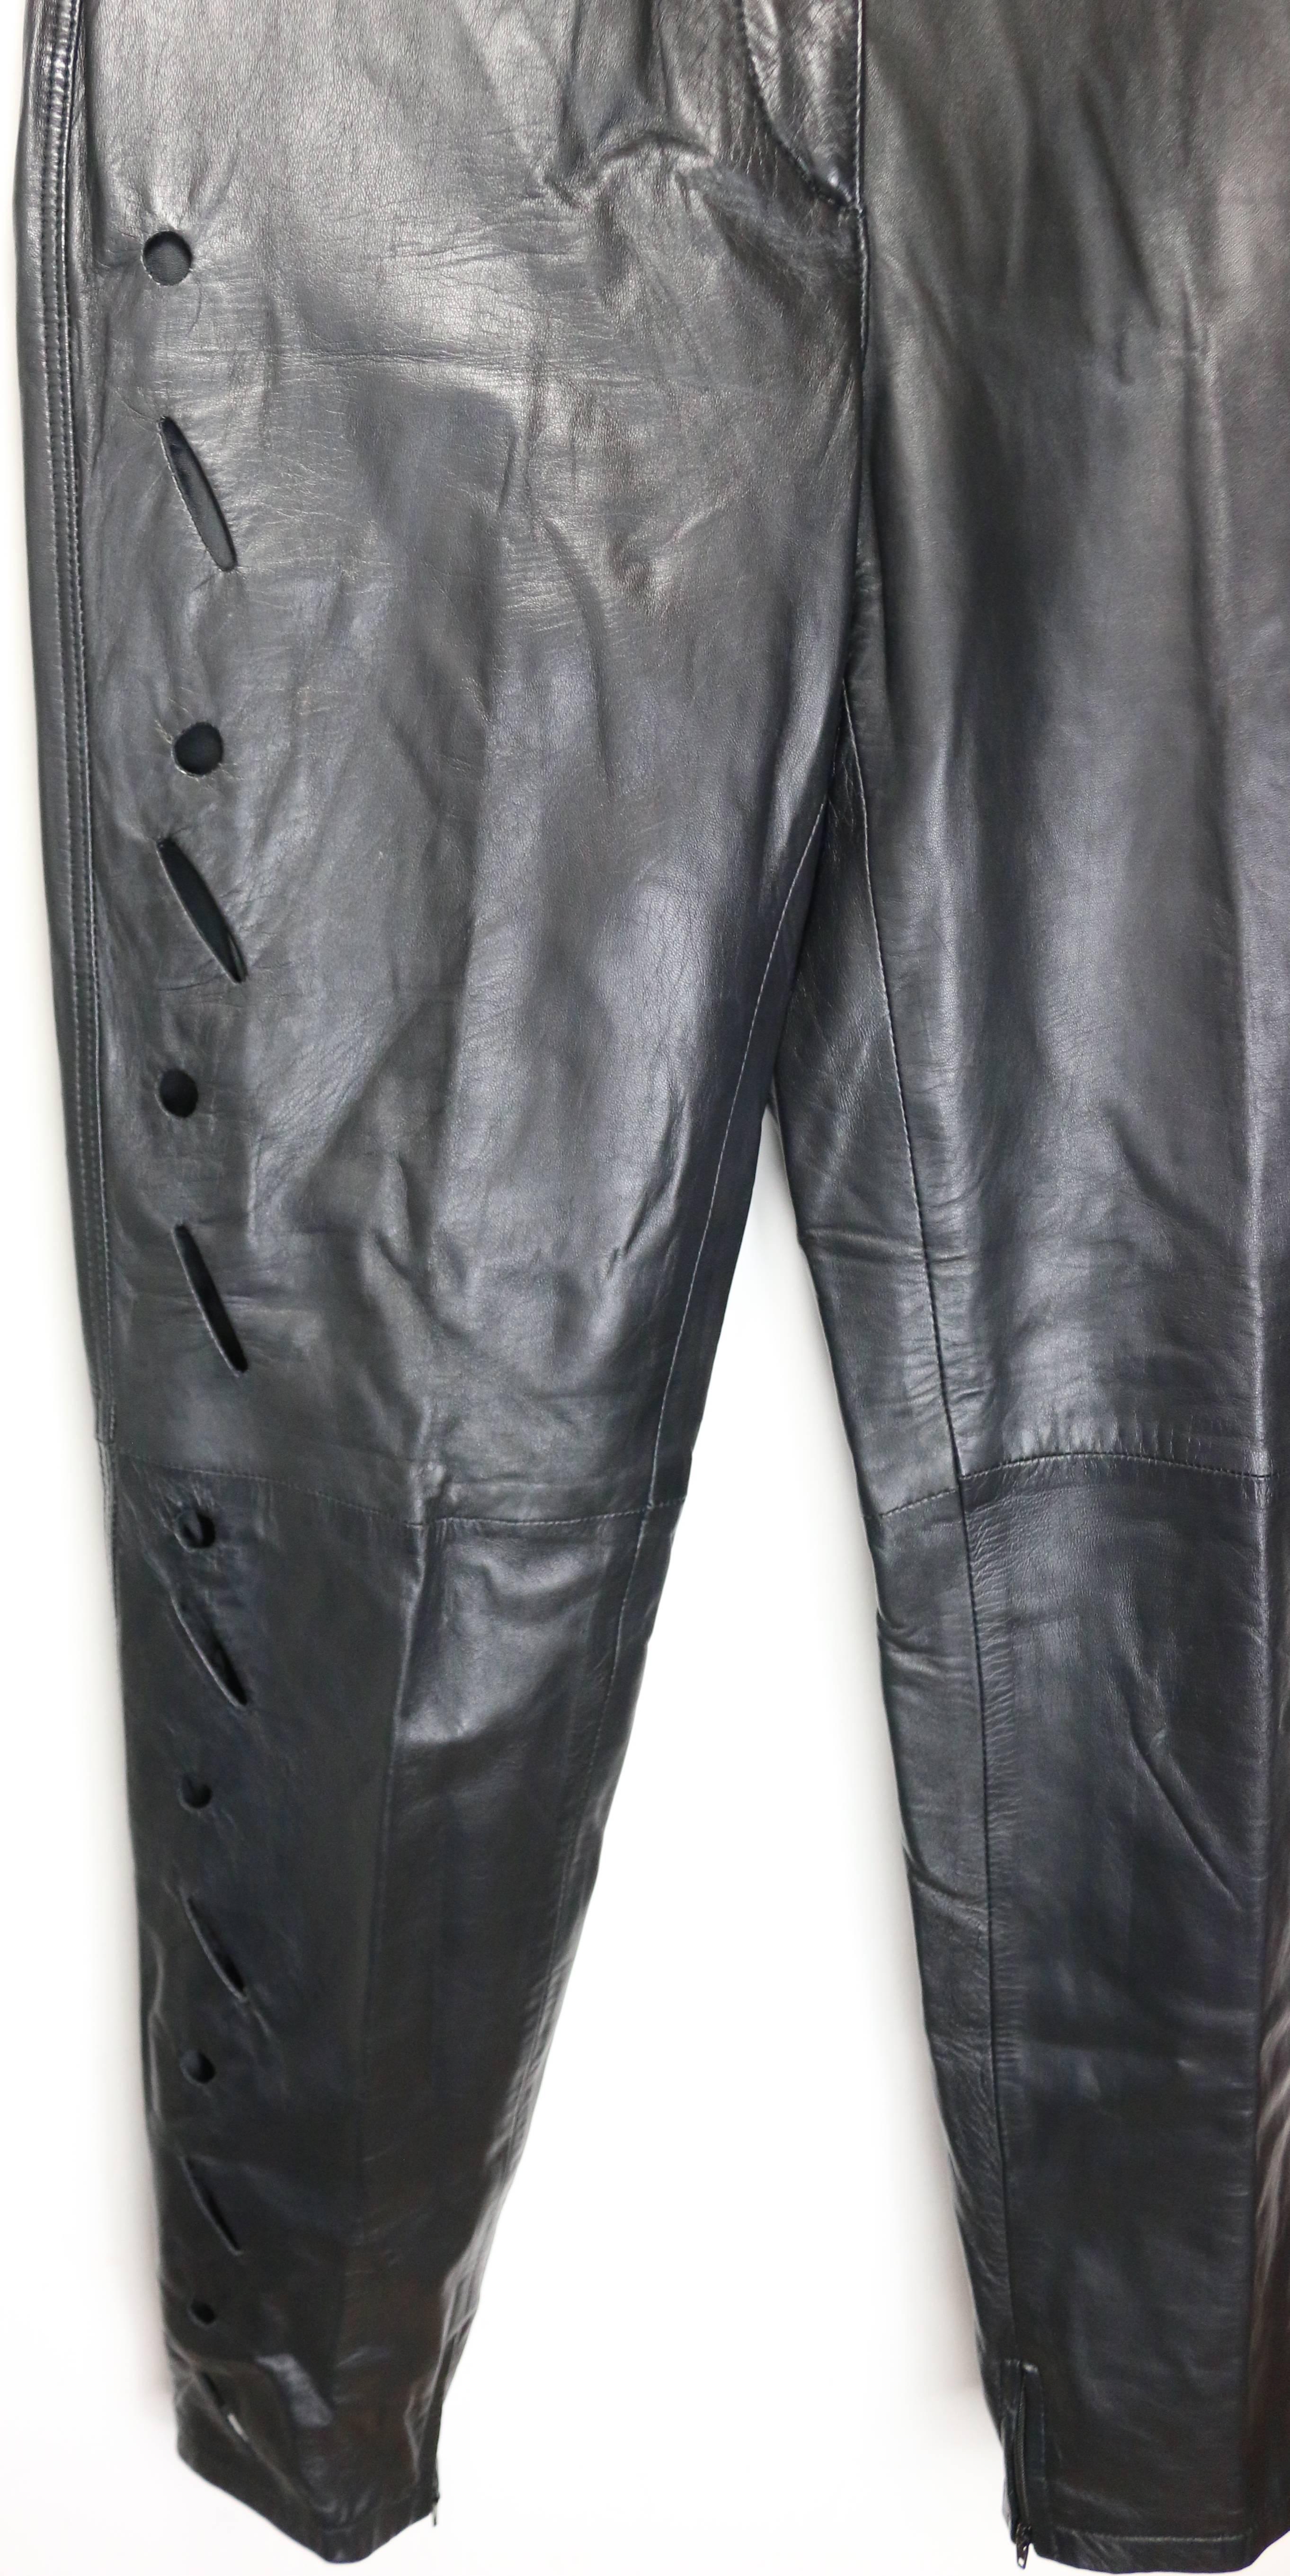 - Vintage 90s Istante by Gianni Versace black leather with cutout pattern pants. It is a slim tapped leg cut style.  

- Featuring right leg front, left leg back and back pockets cutout patterns.  Zipper on the bottom inner leg hem. 

- Made in